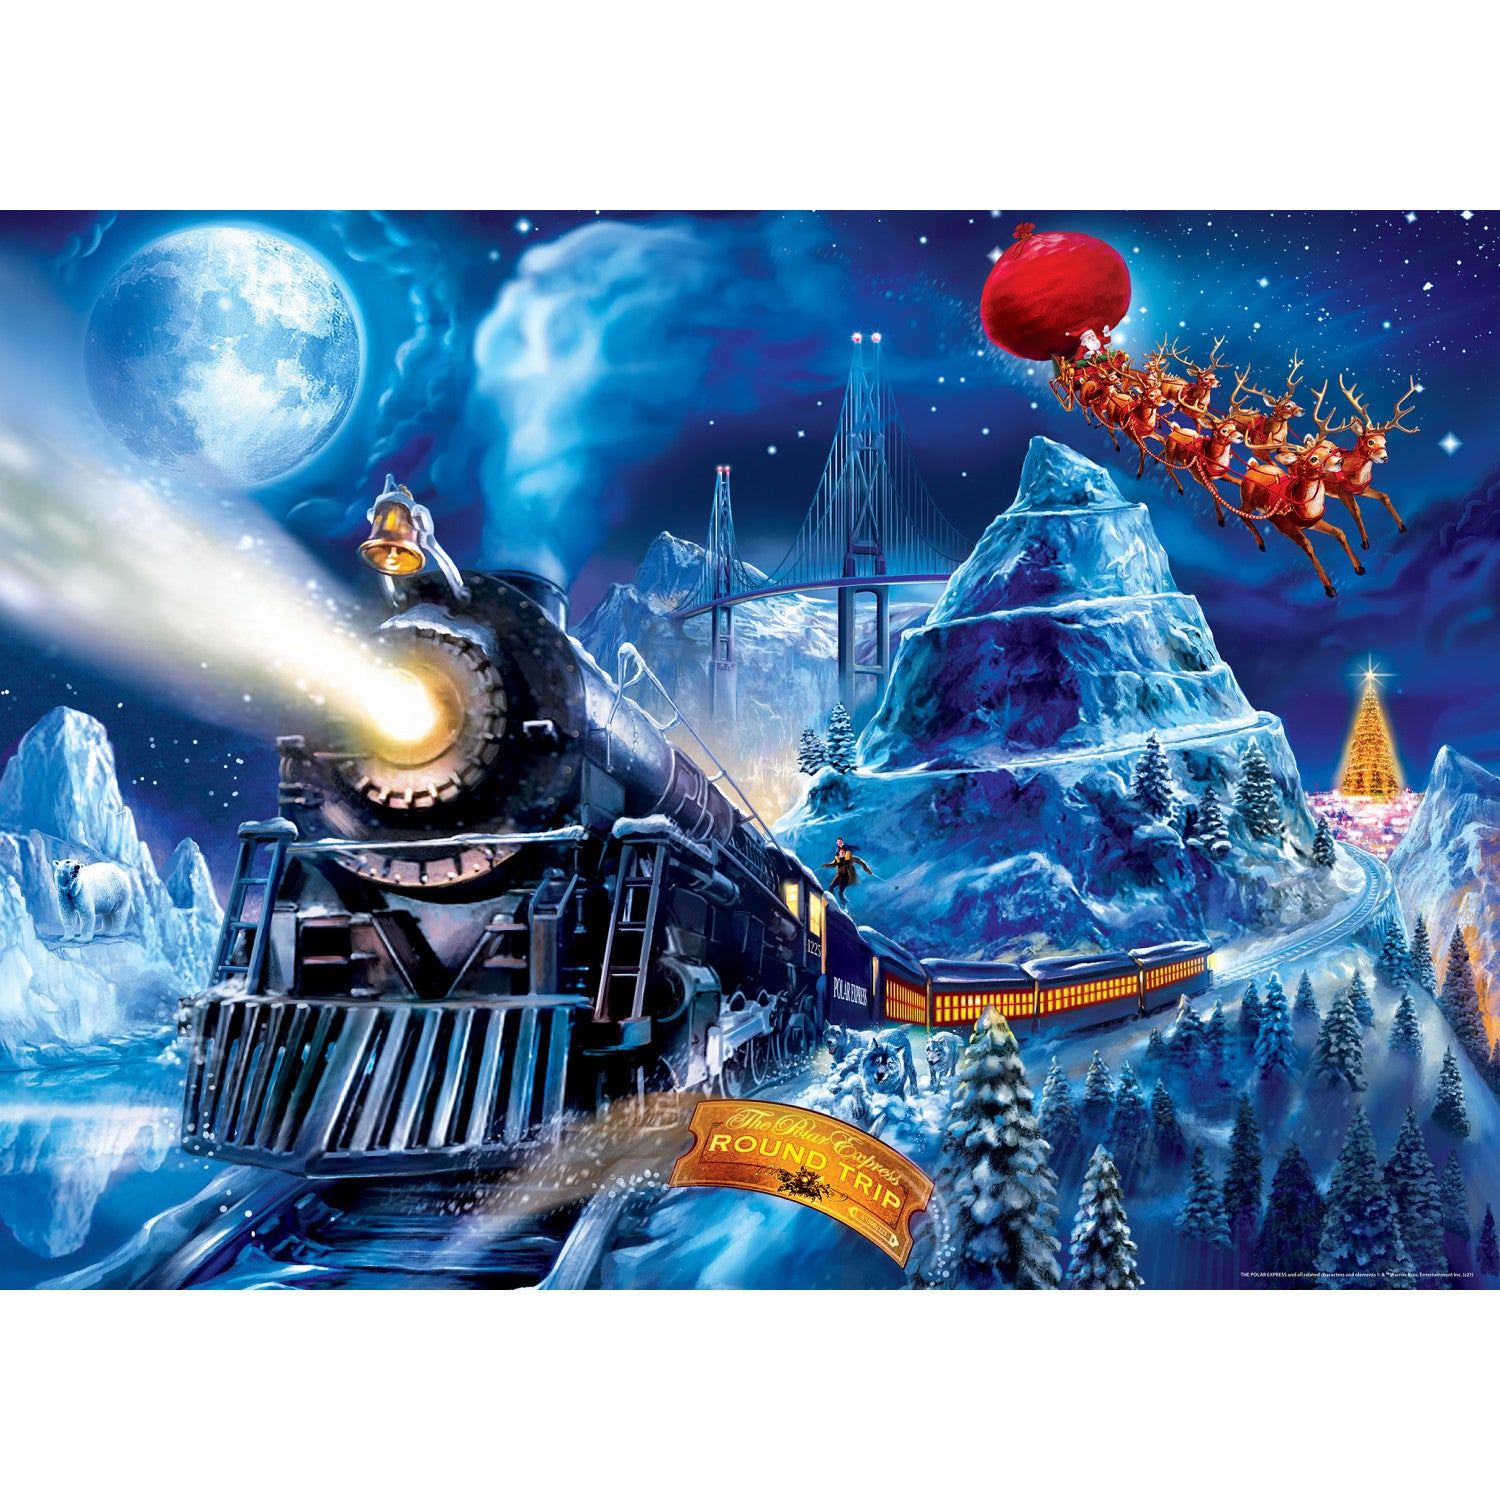 The Polar Express - Race to the Pole 1000 Piece Puzzle